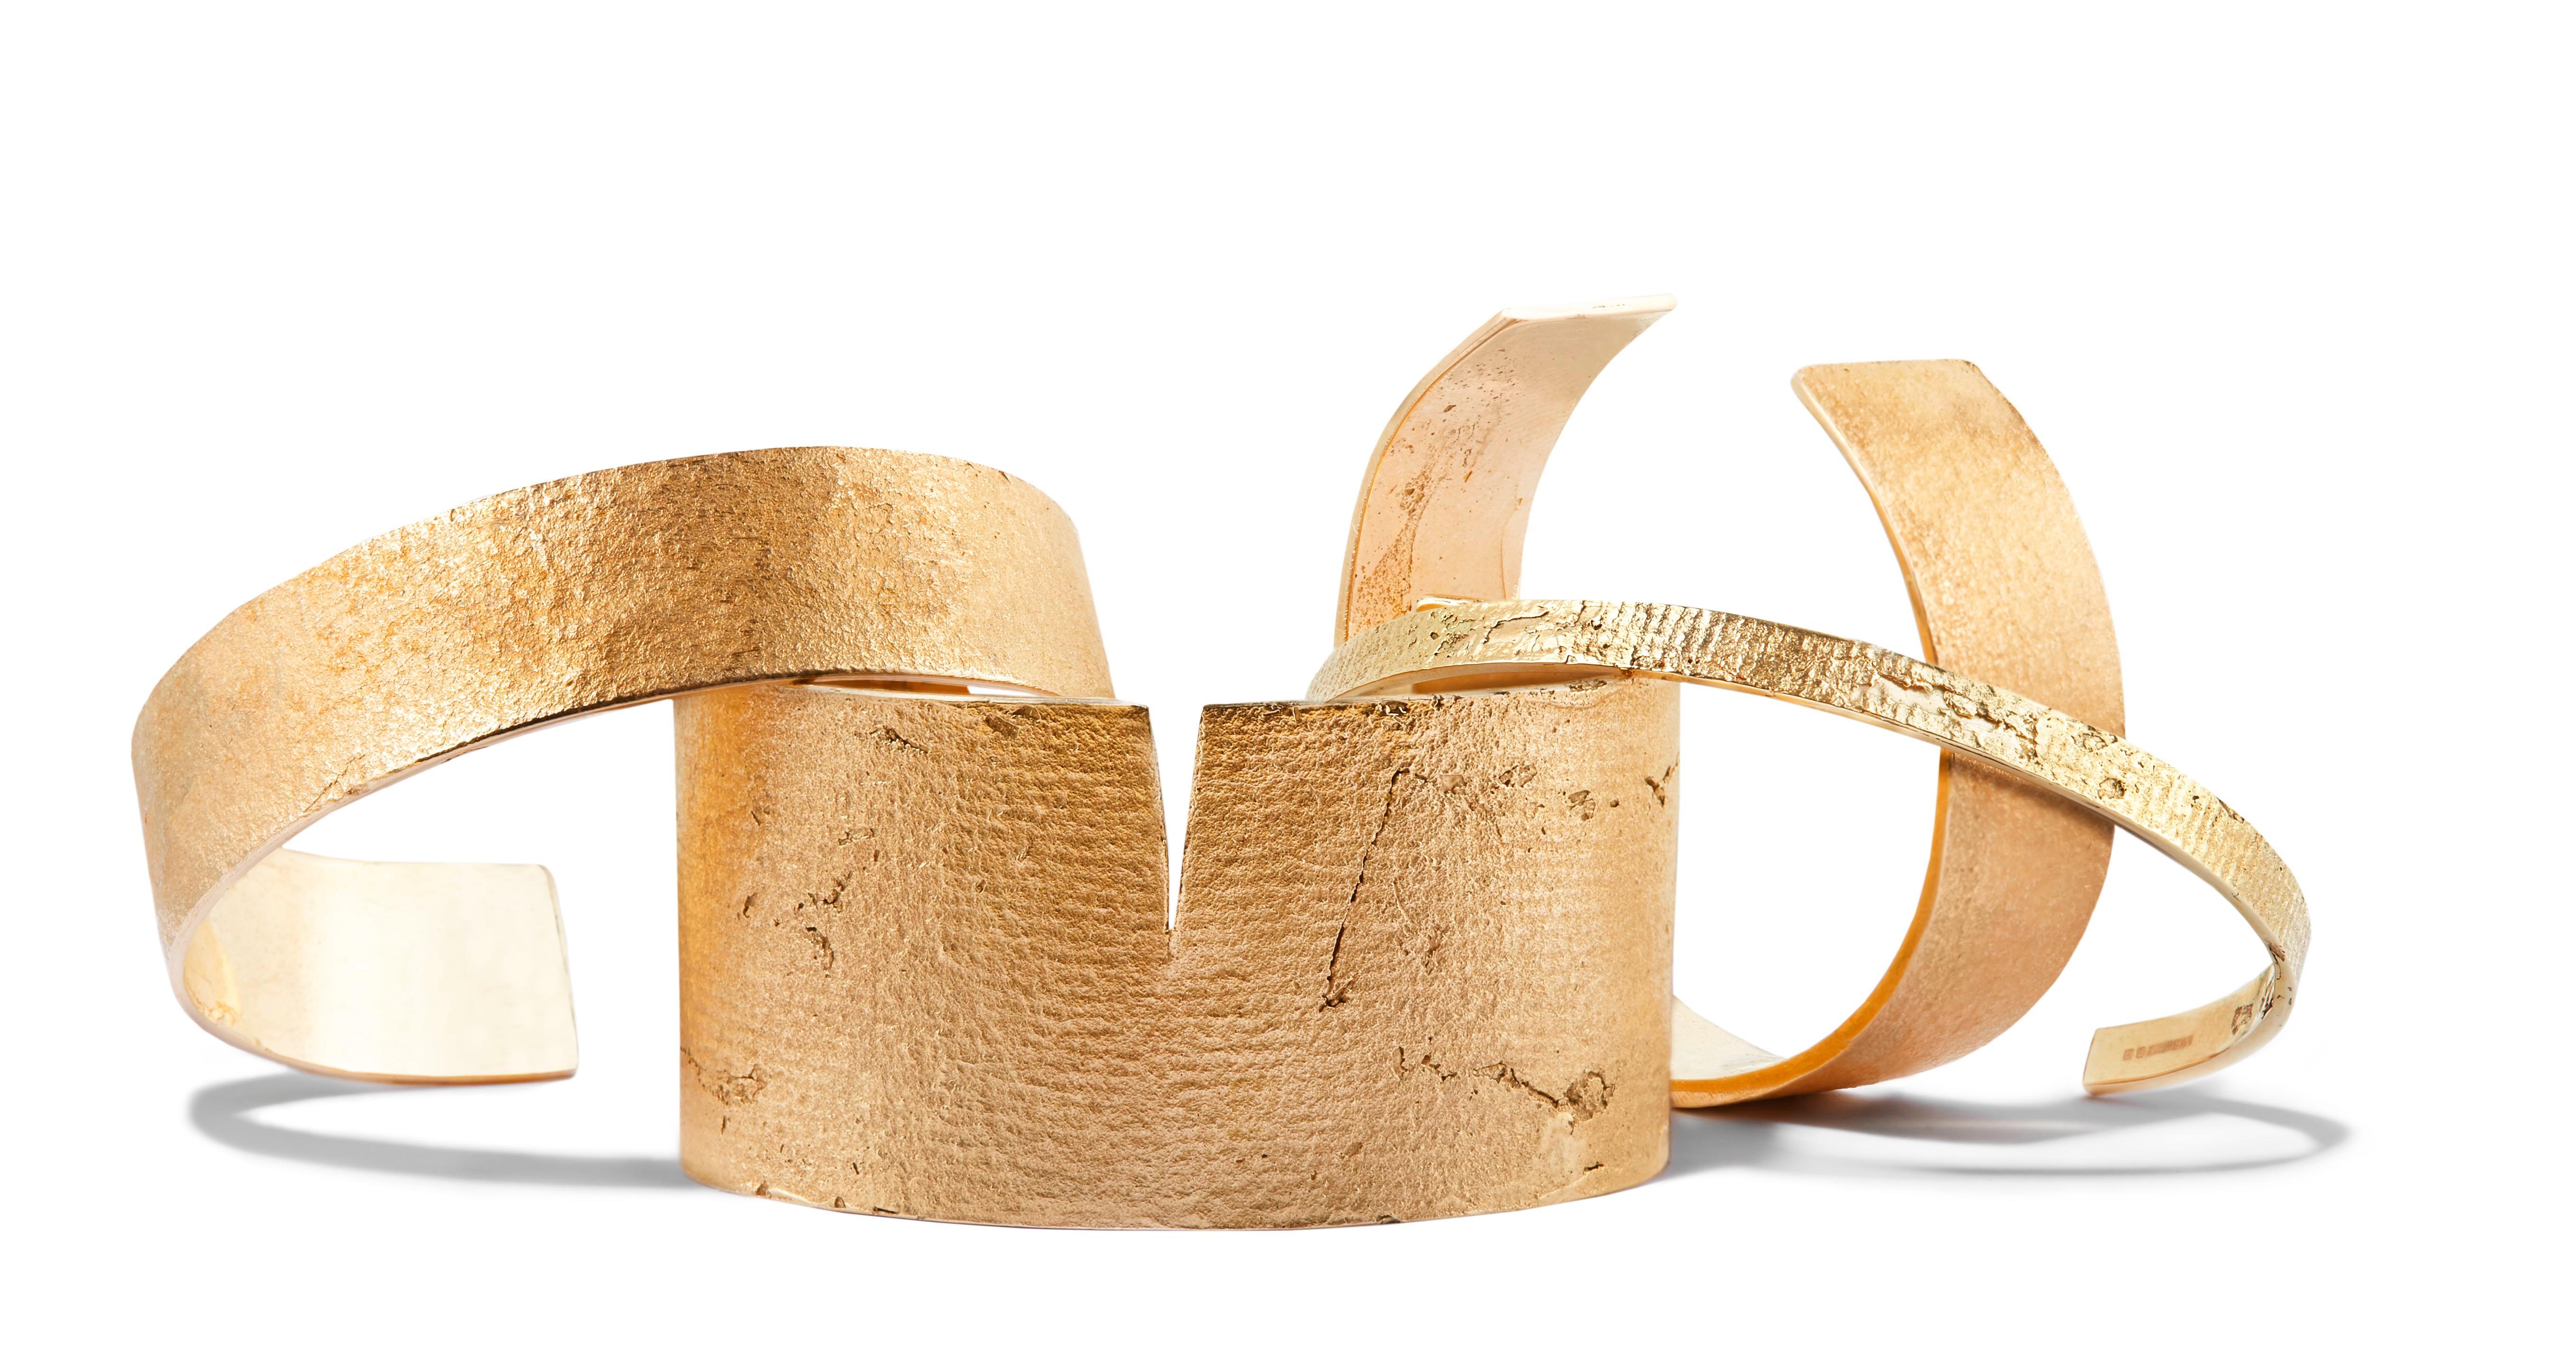 This classic cuff bracelet is handcrafted in solid 9-carat gold with a shimmering rustic texture.

Every piece in this collection is individually hand-crafted in paper and cast directly into precious metal in a unique and innovative process.  Every